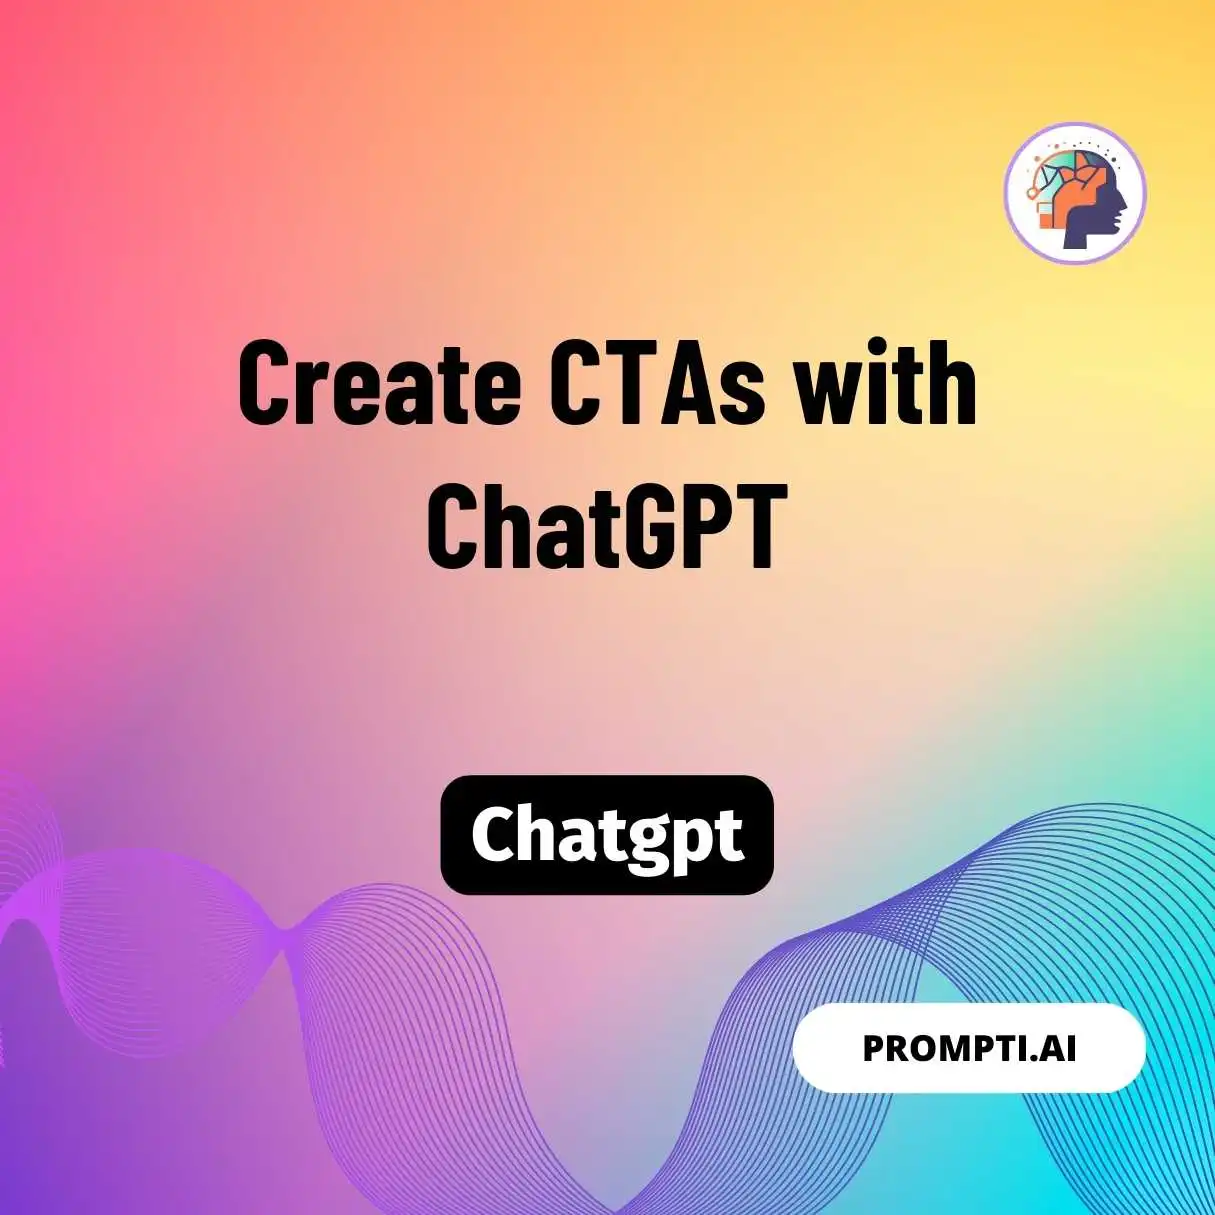 Create CTAs with ChatGPT